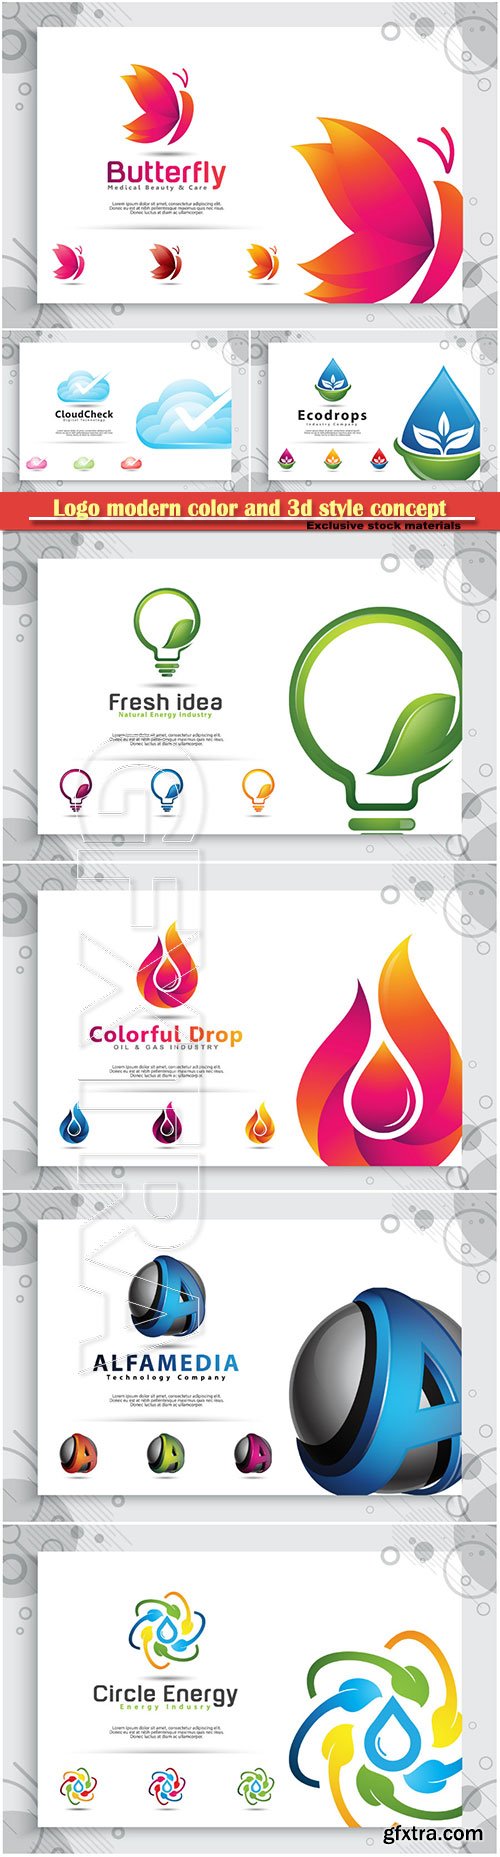 Logo modern color and 3d style concept, business and company identity # 2